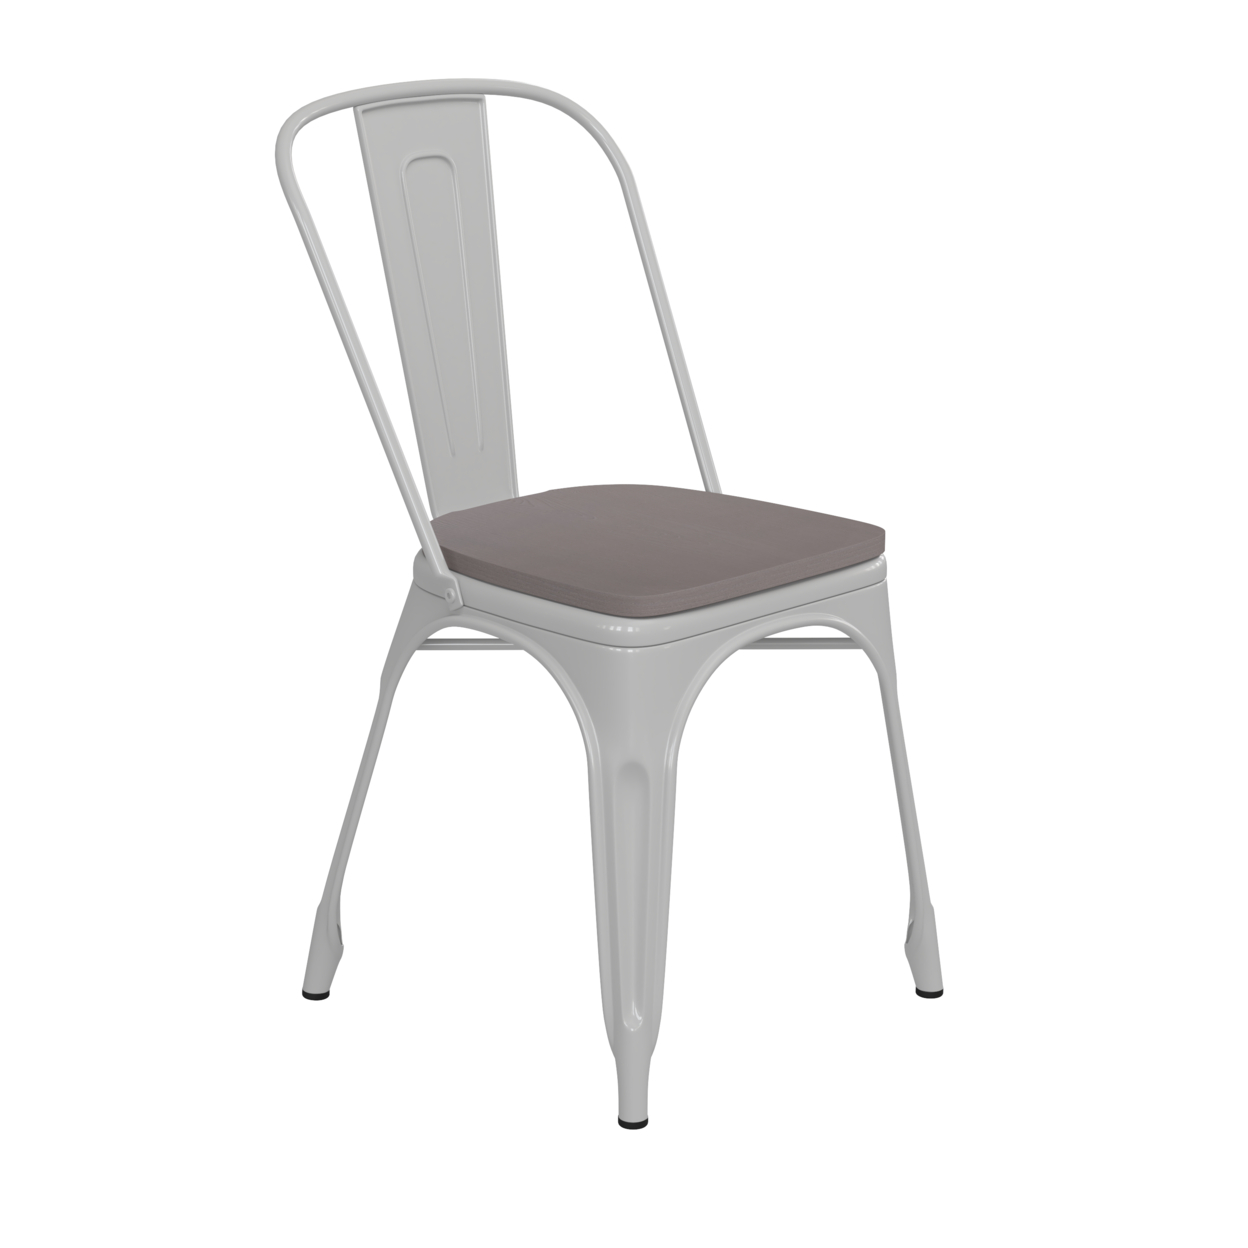 Metal Chair, Curved Open Back, Polyresin Sleek Gray Seat, Light Gray